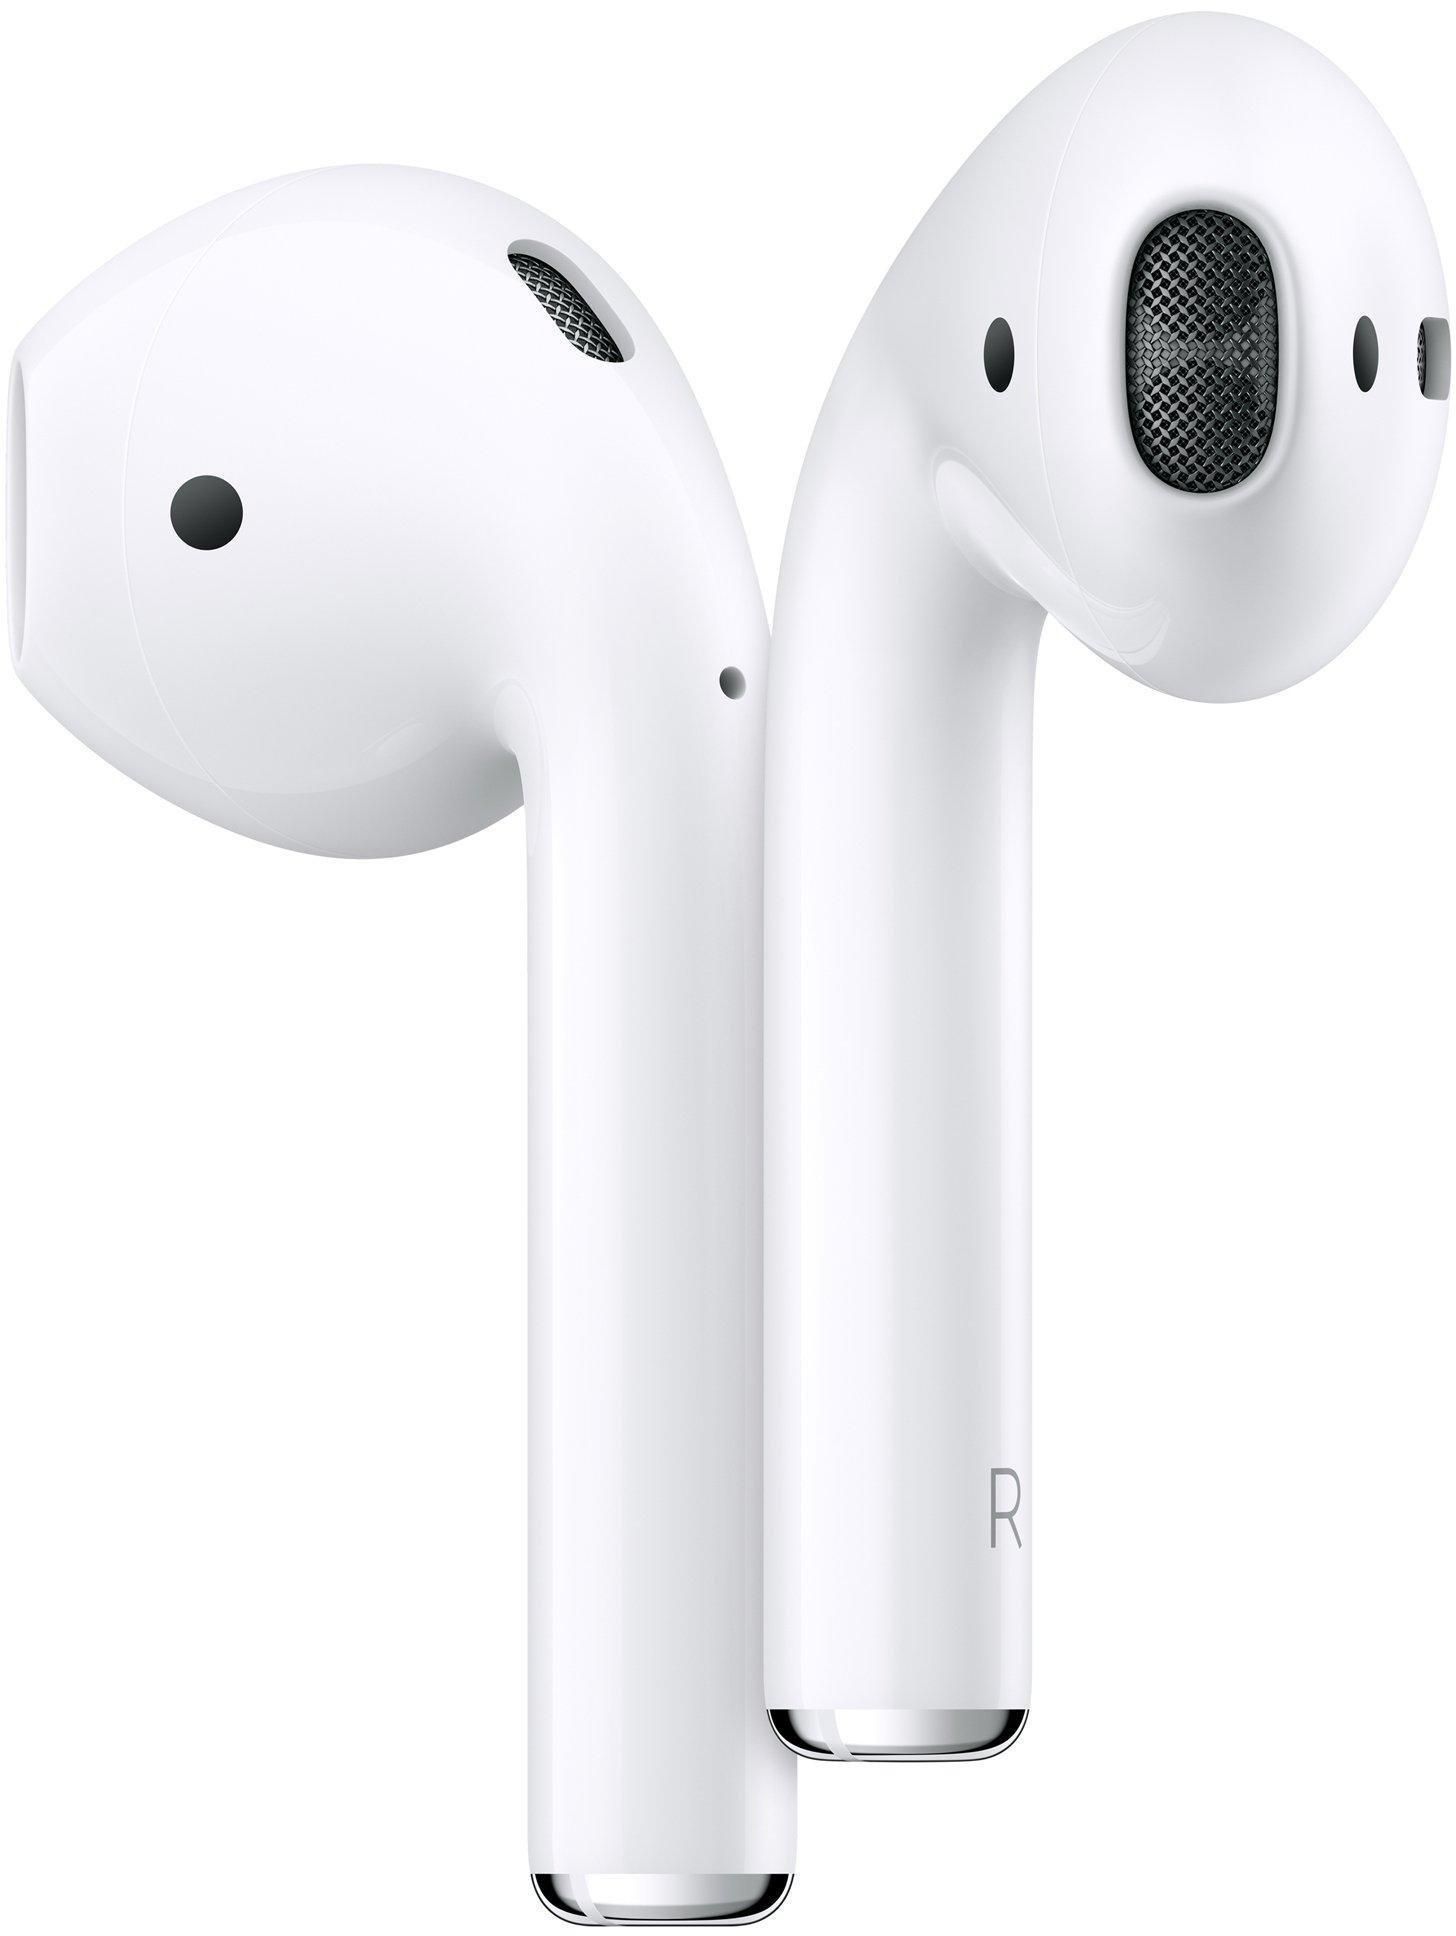 Apple AirPods 2nd Gen with Wireless Charging Case, White